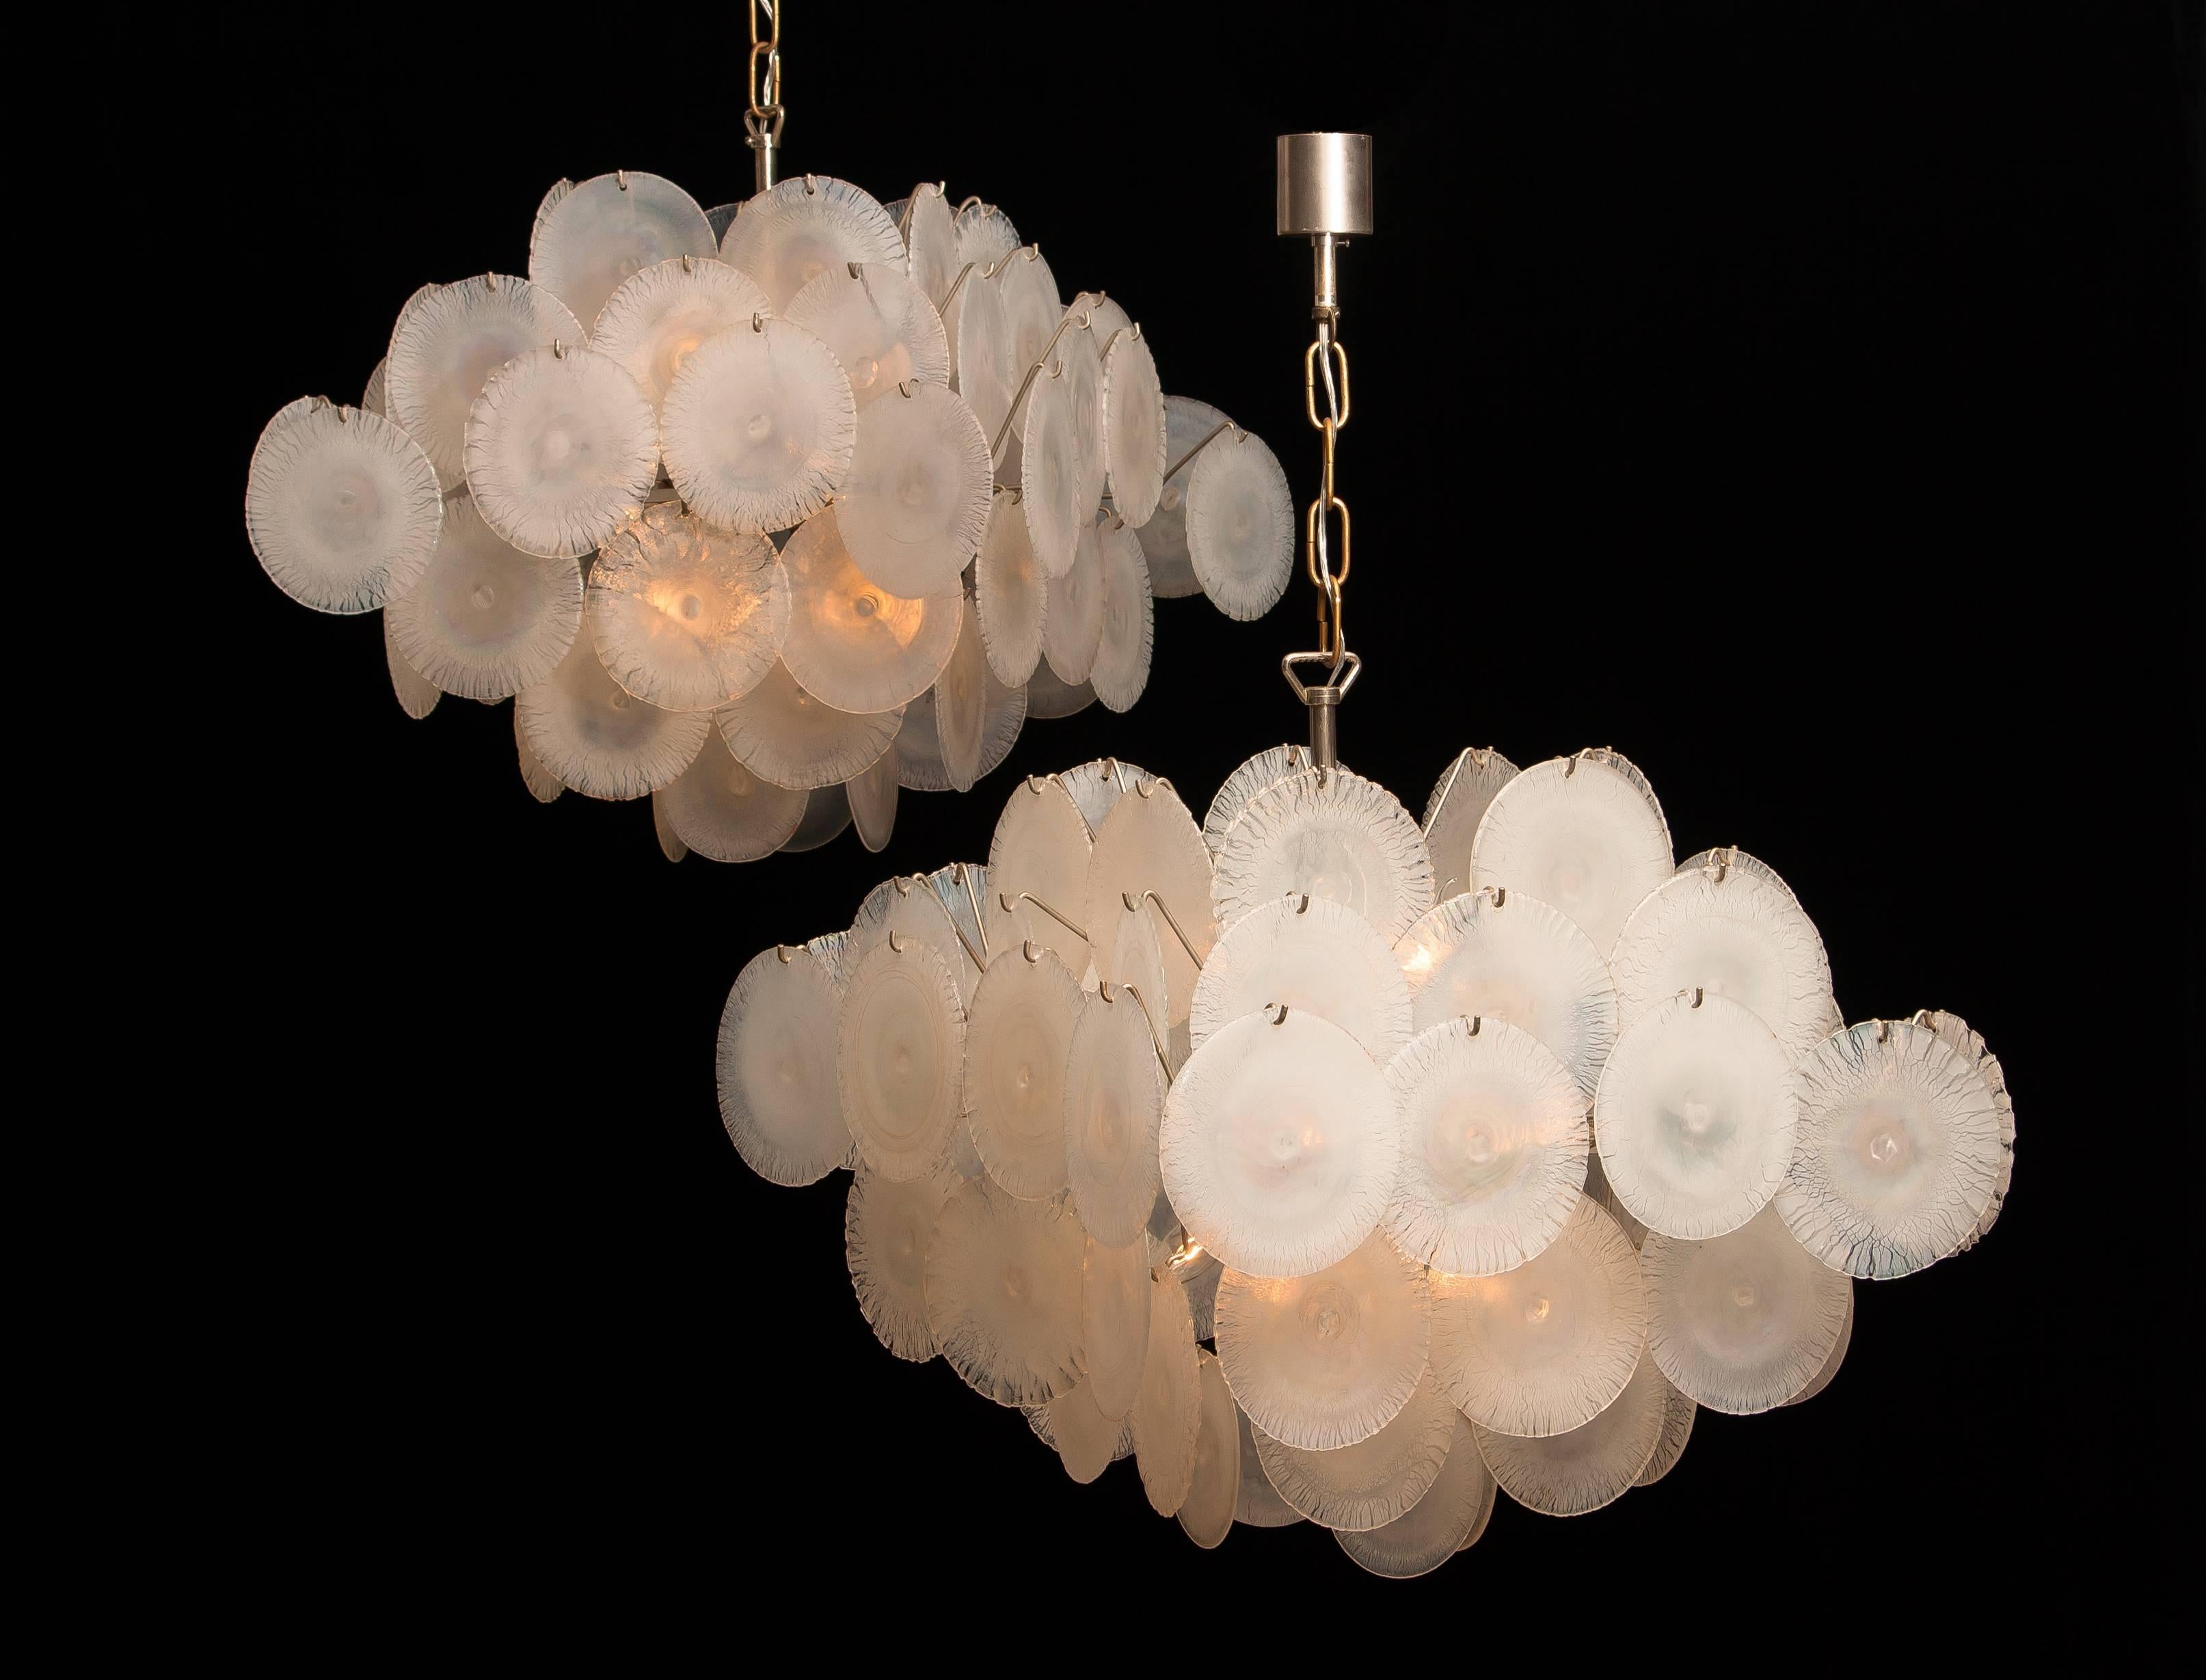 Mid-Century Modern 1960s, Set Gino Vistosi Chandeliers with White / Pearl Murano Crystal Discs